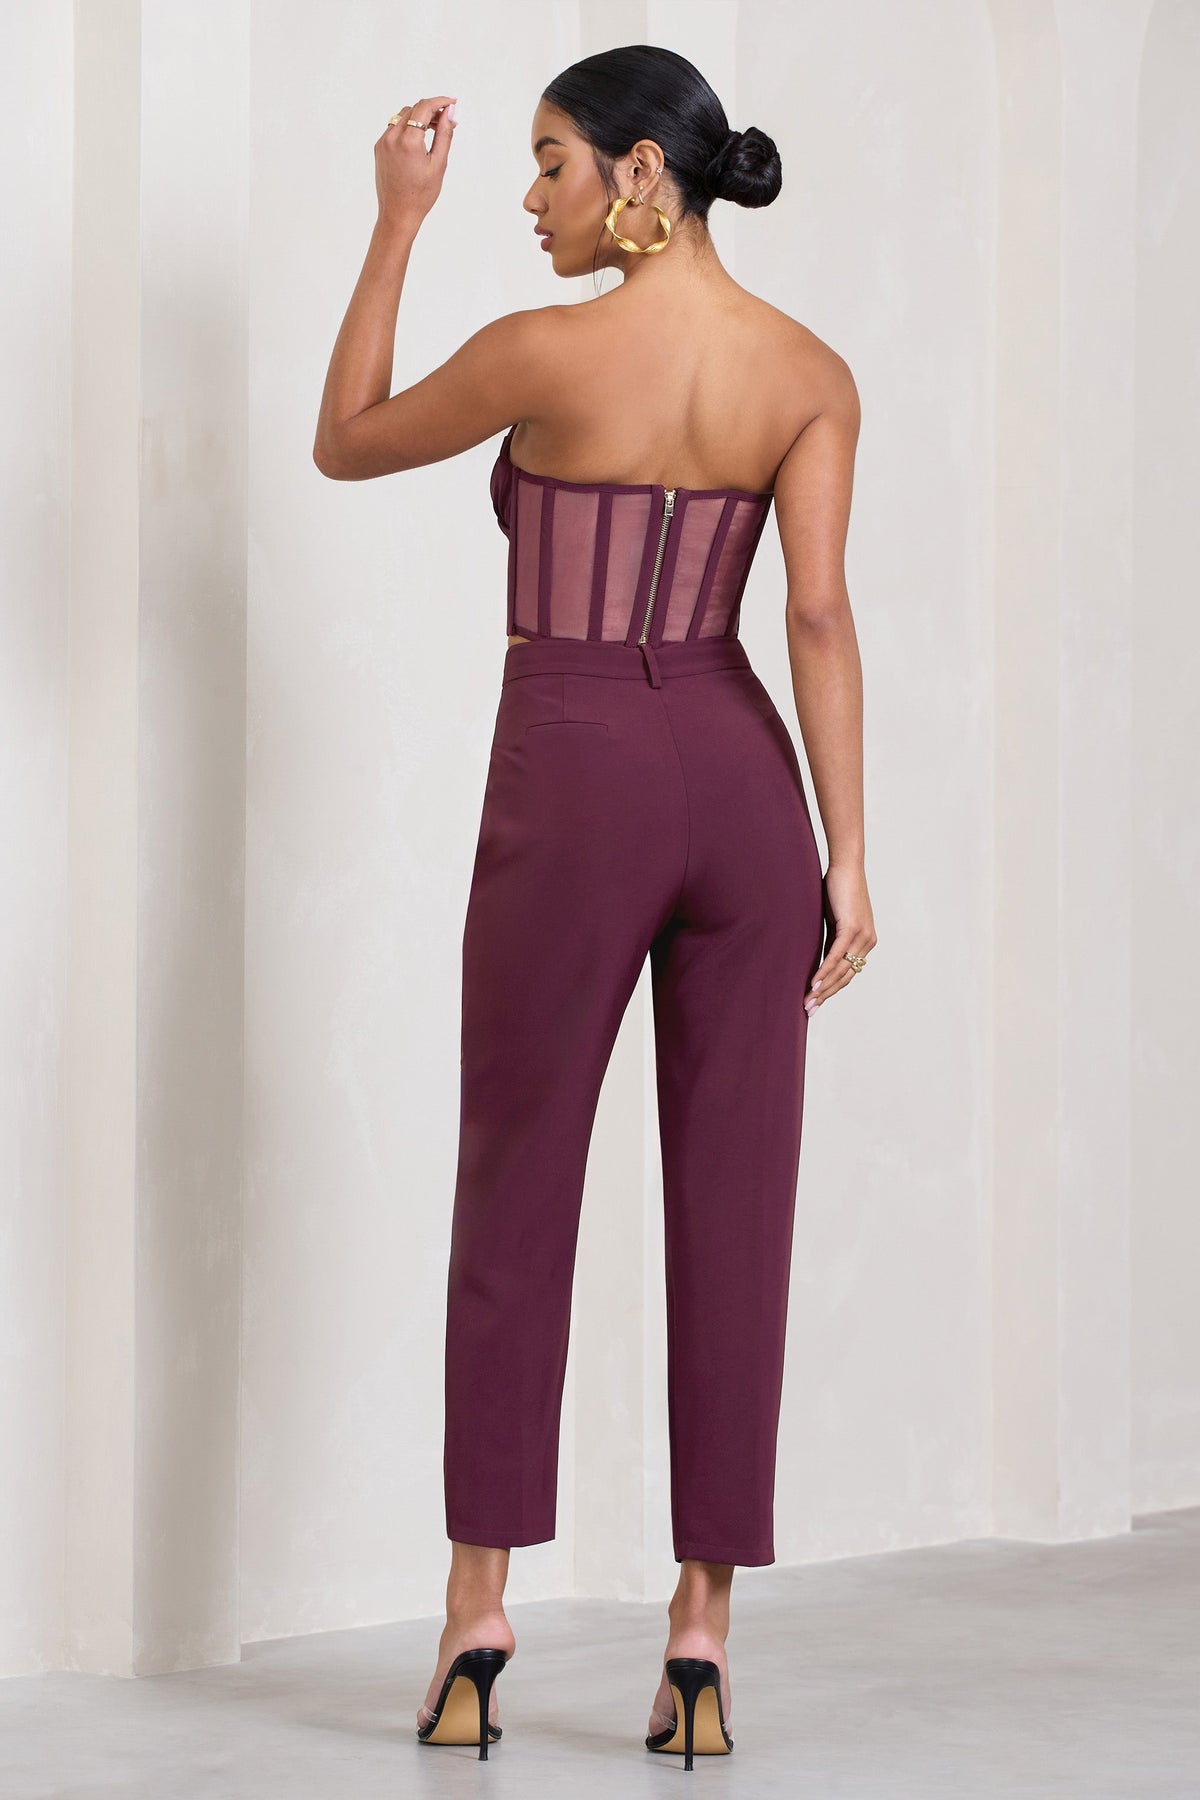 Glossia Fashion Maroon Formal Tapered Cigarette Trousers for Women - 82650